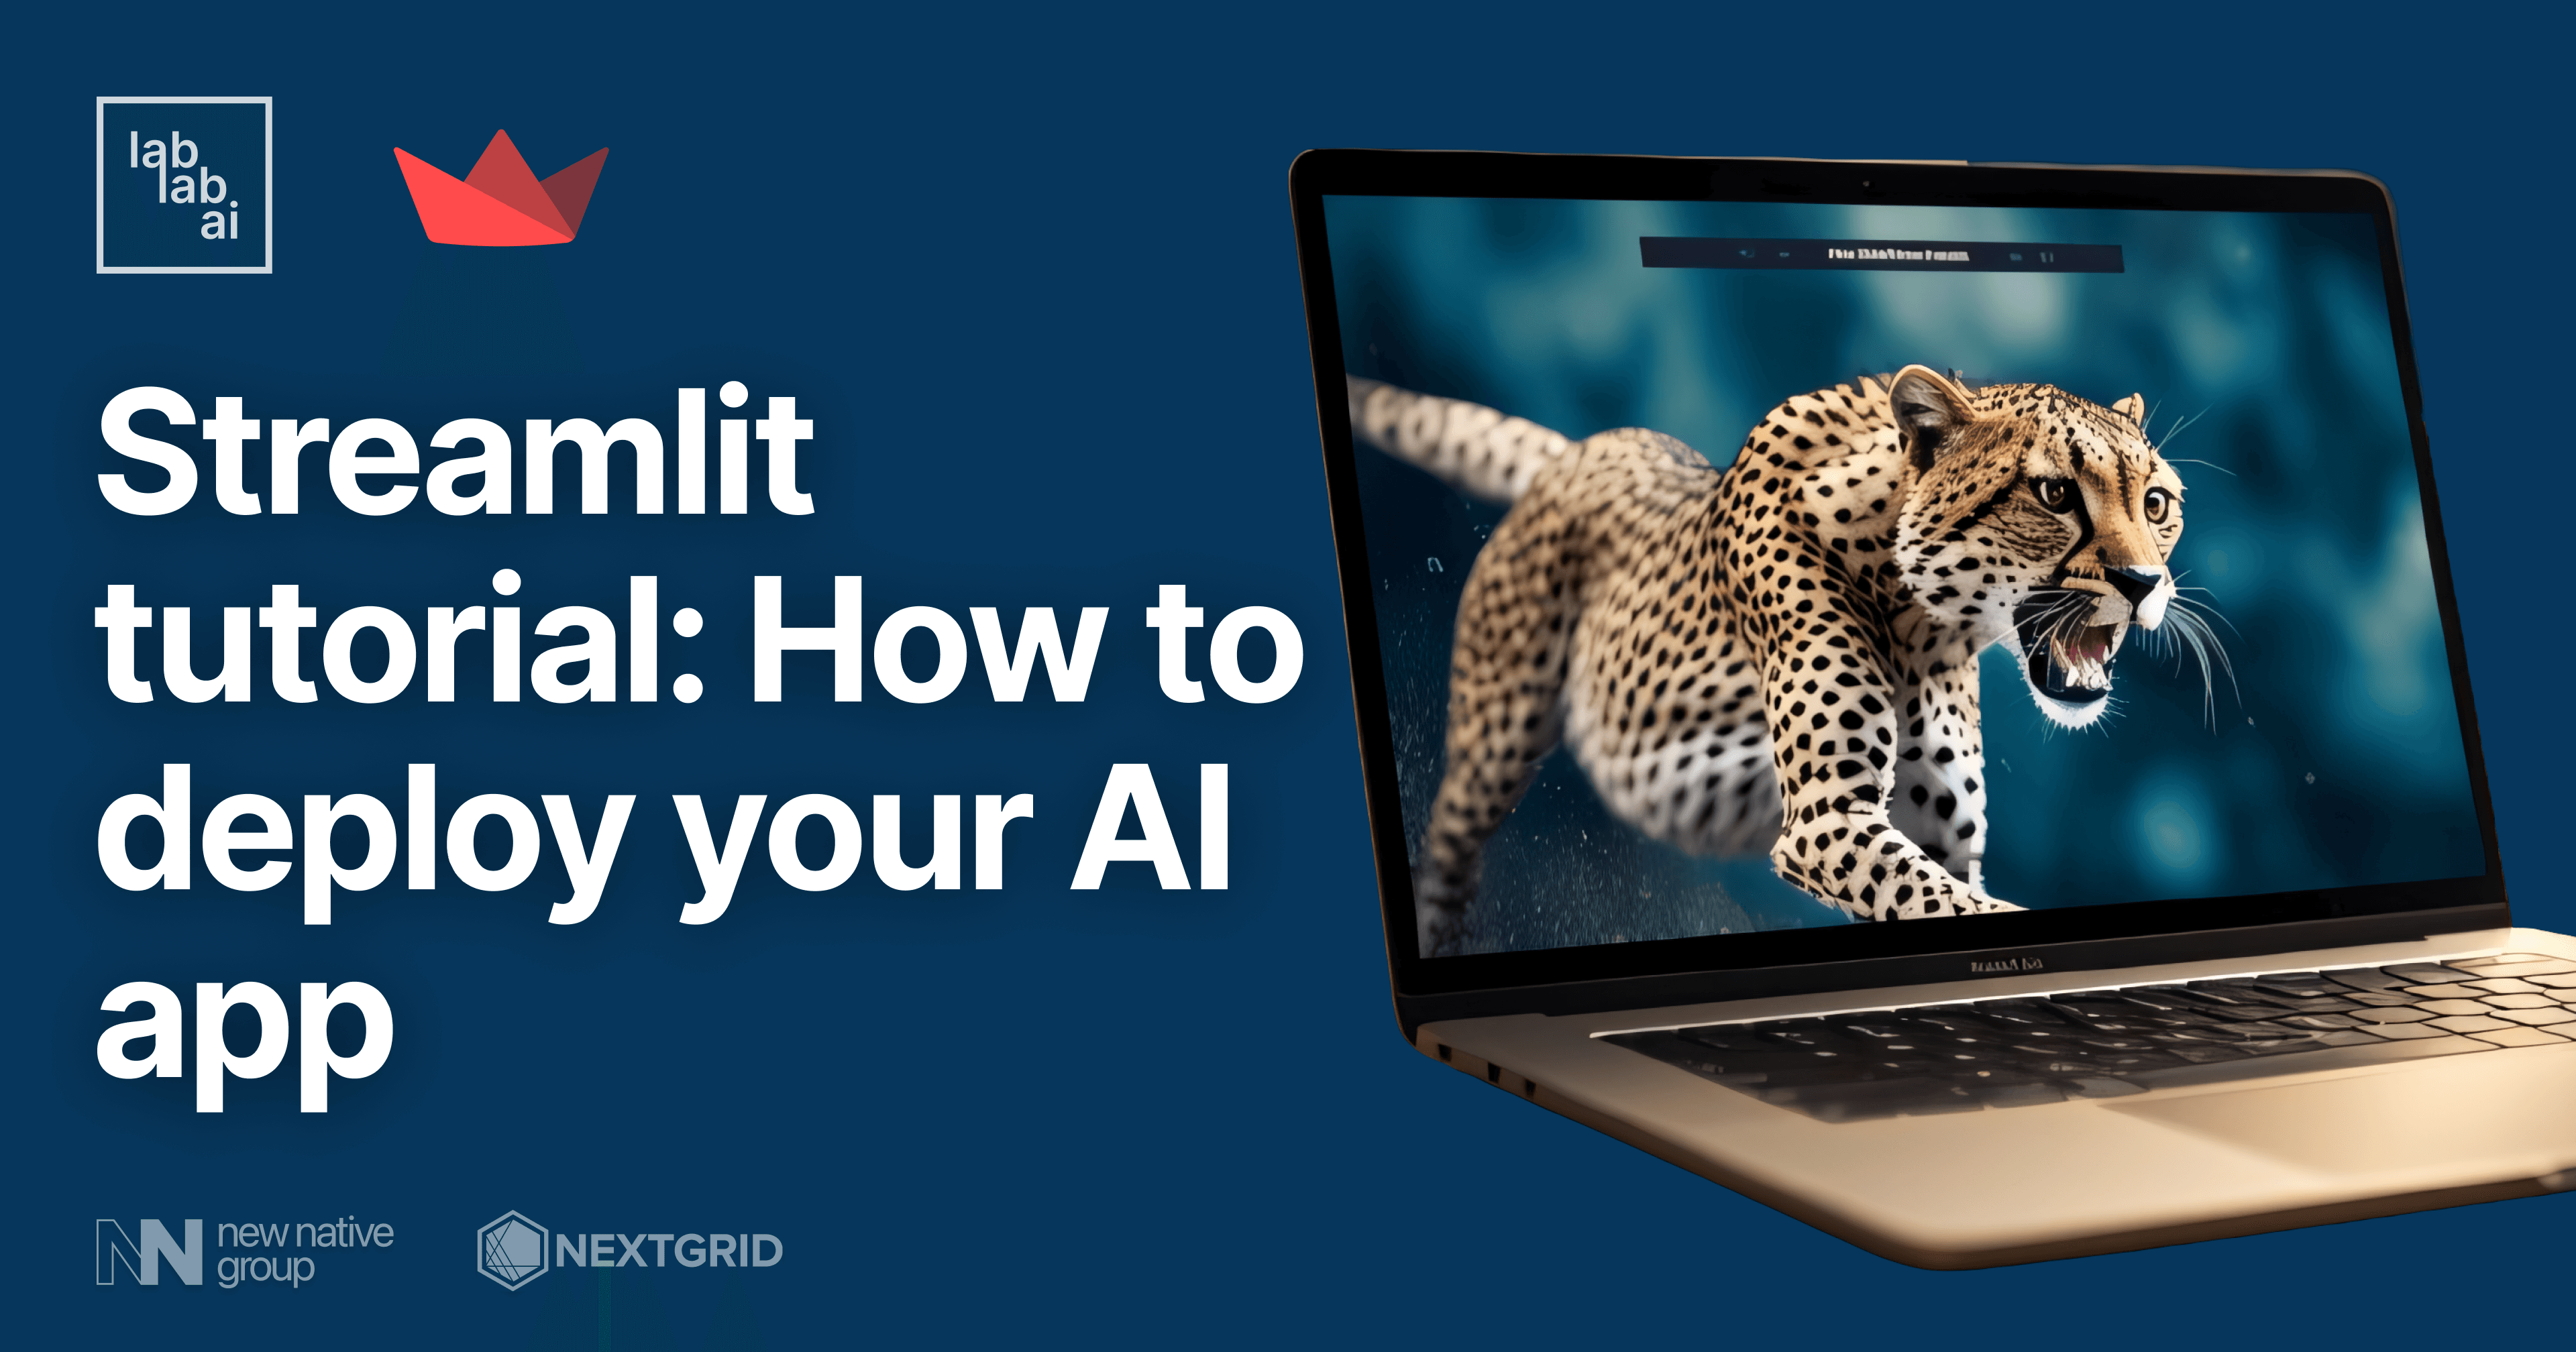 Streamlit: How to deploy your AI app